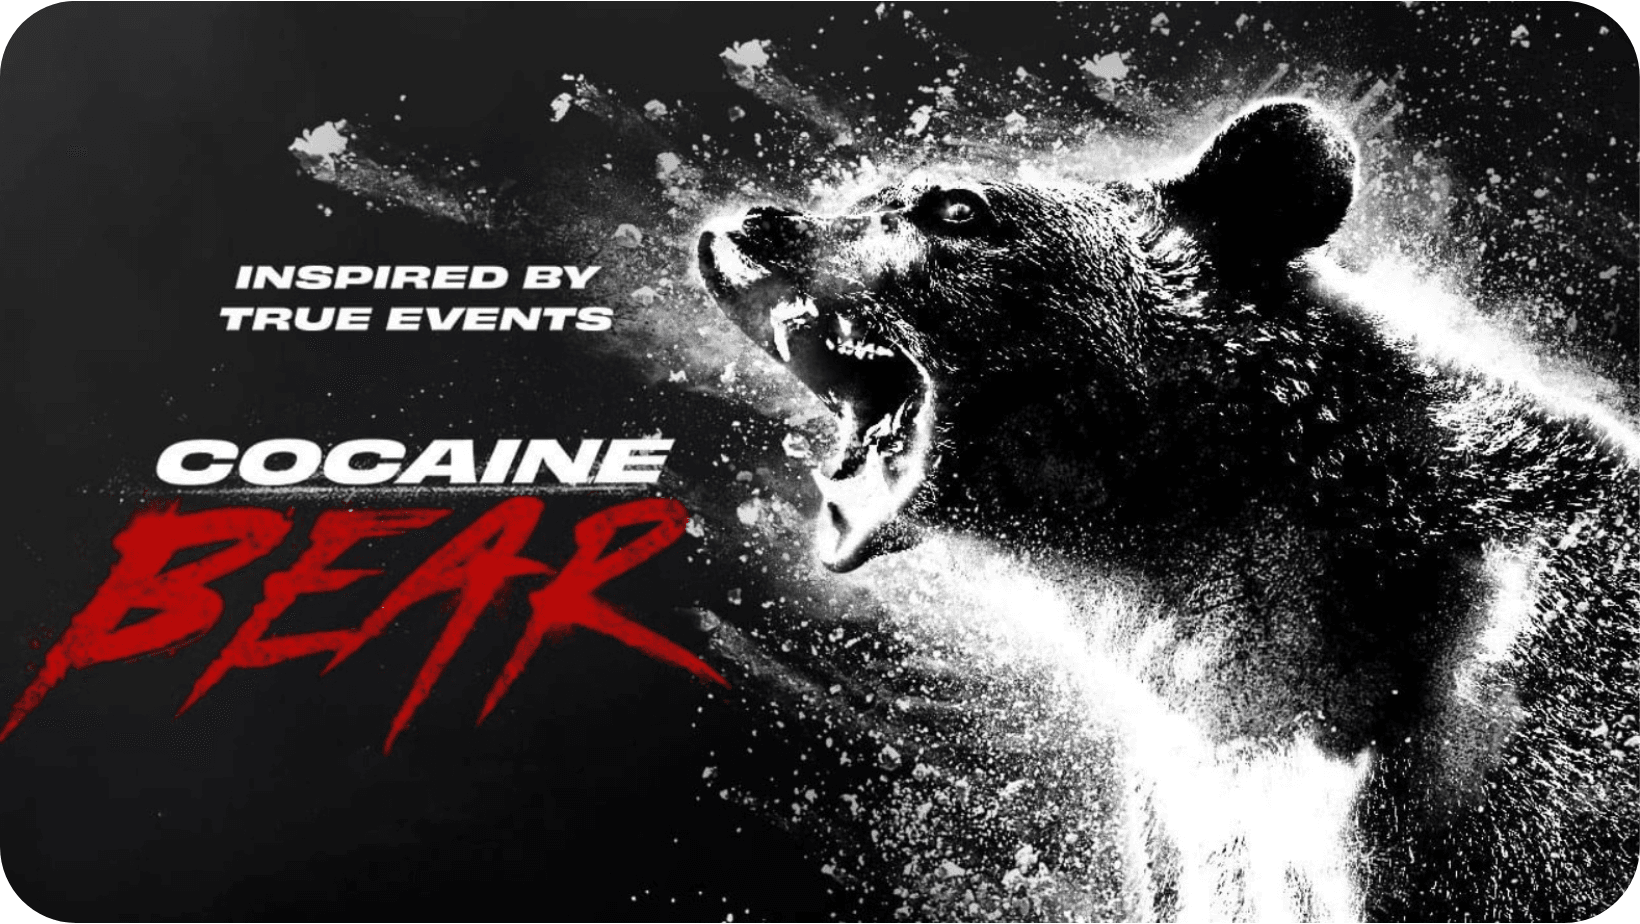 Cocaine Bear promotional film poster graphic